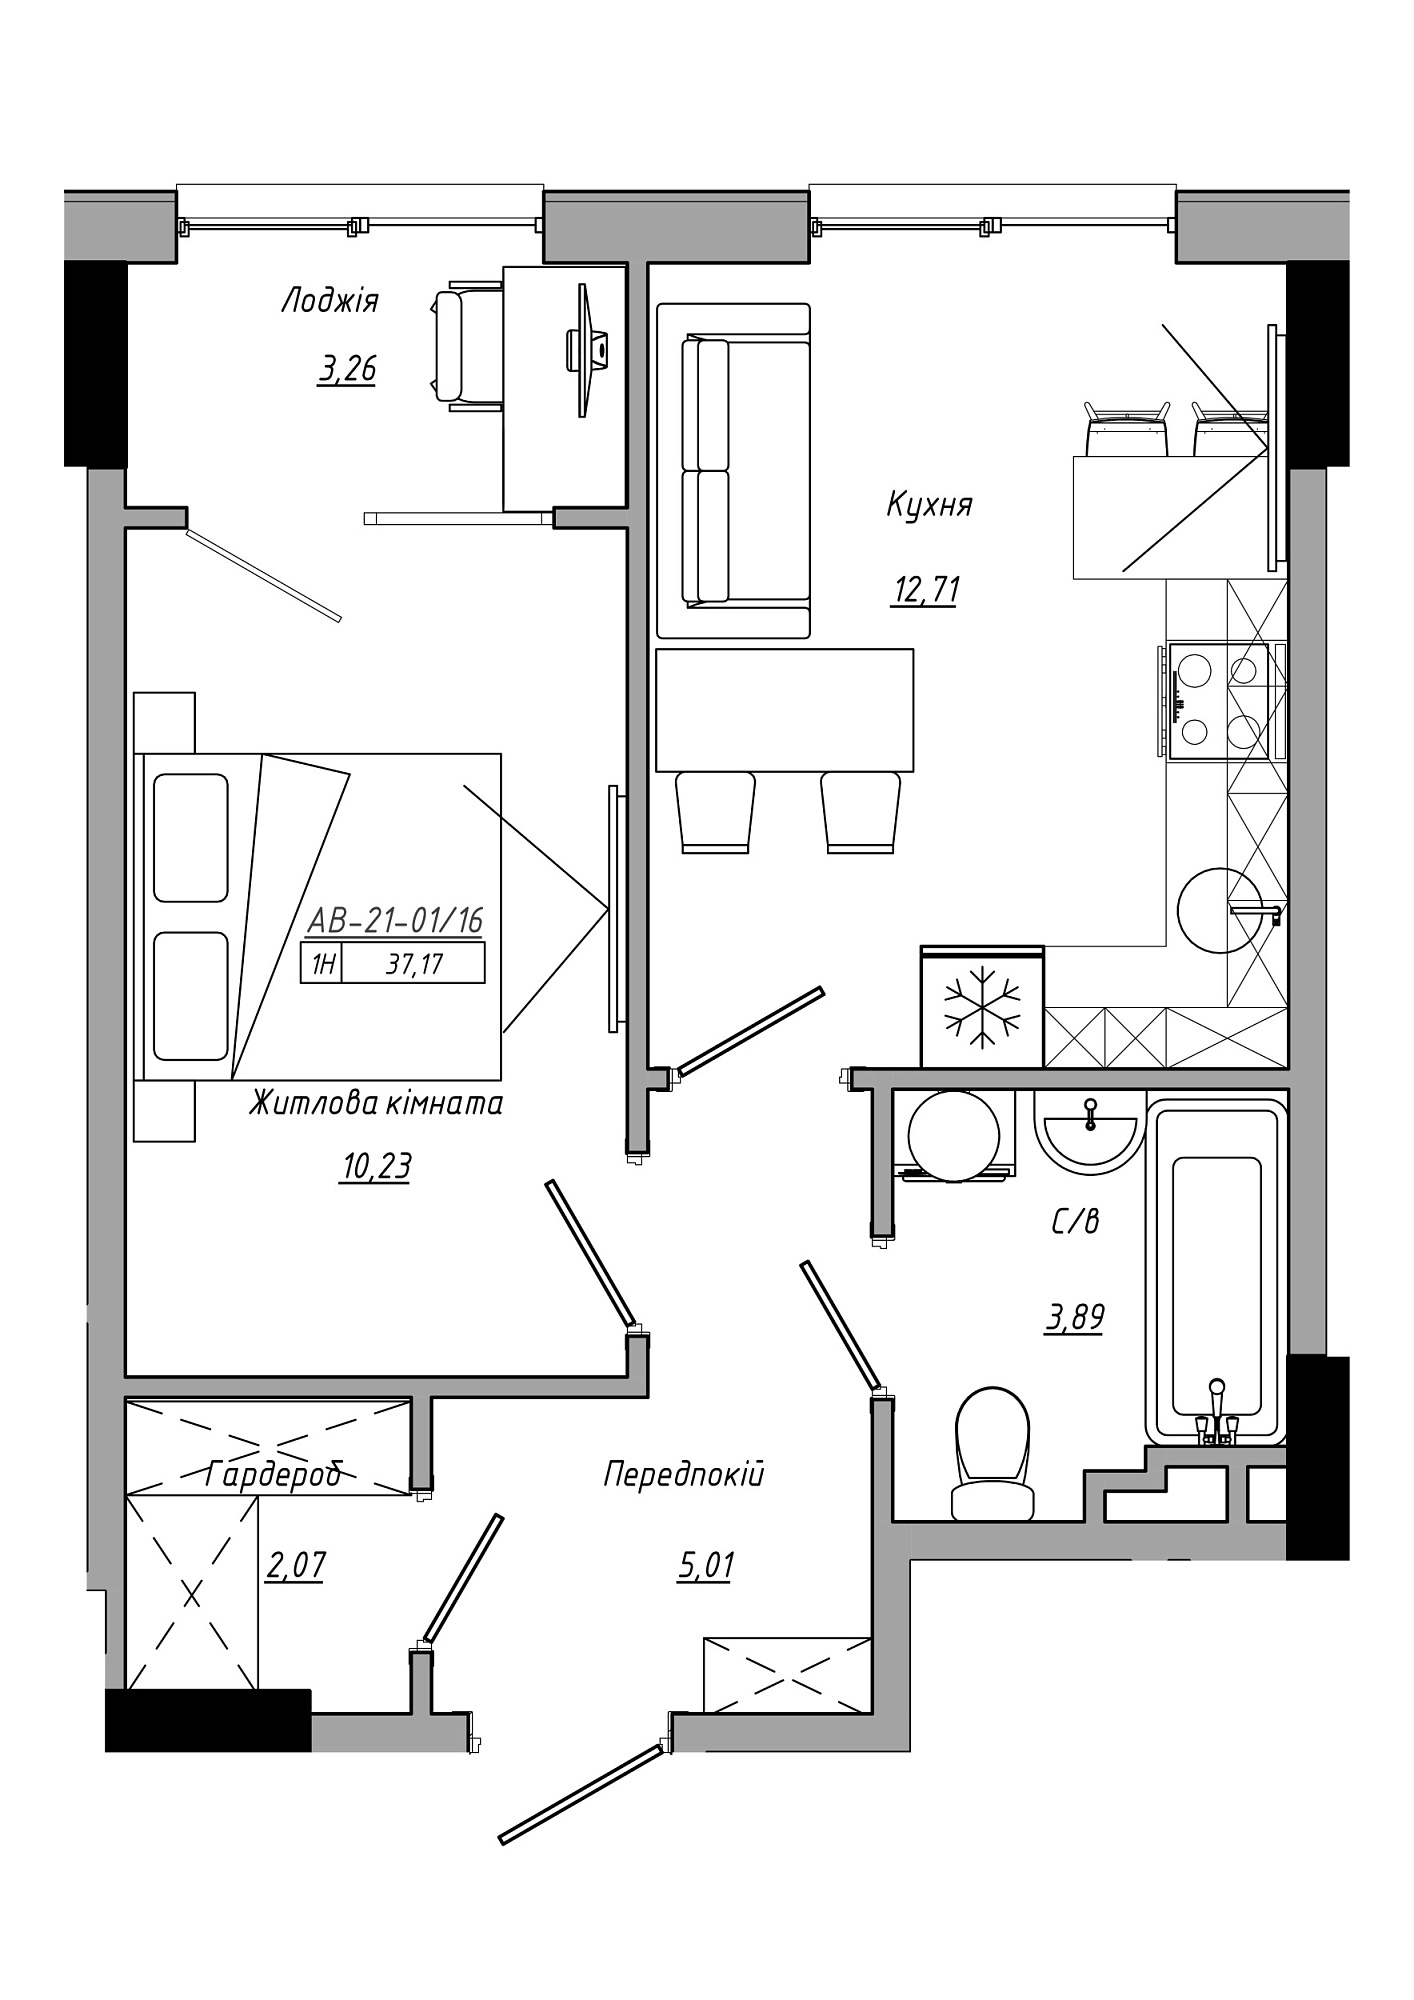 Planning 1-rm flats area 37.17m2, AB-21-01/00016.